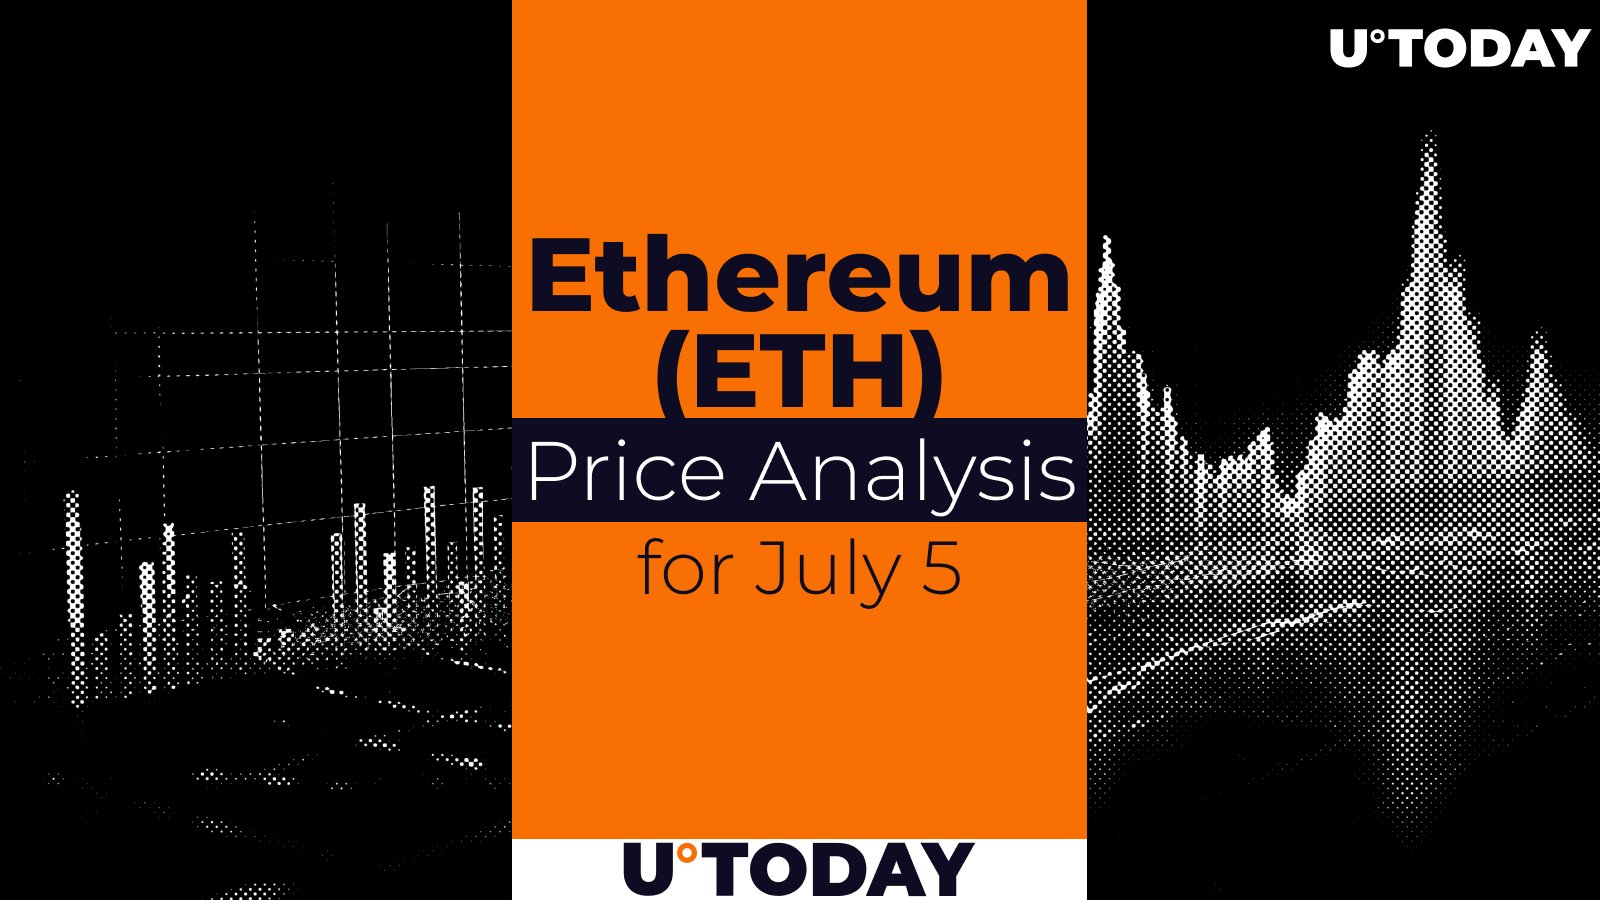 Ethereum (ETH) Price Prediction for July 5